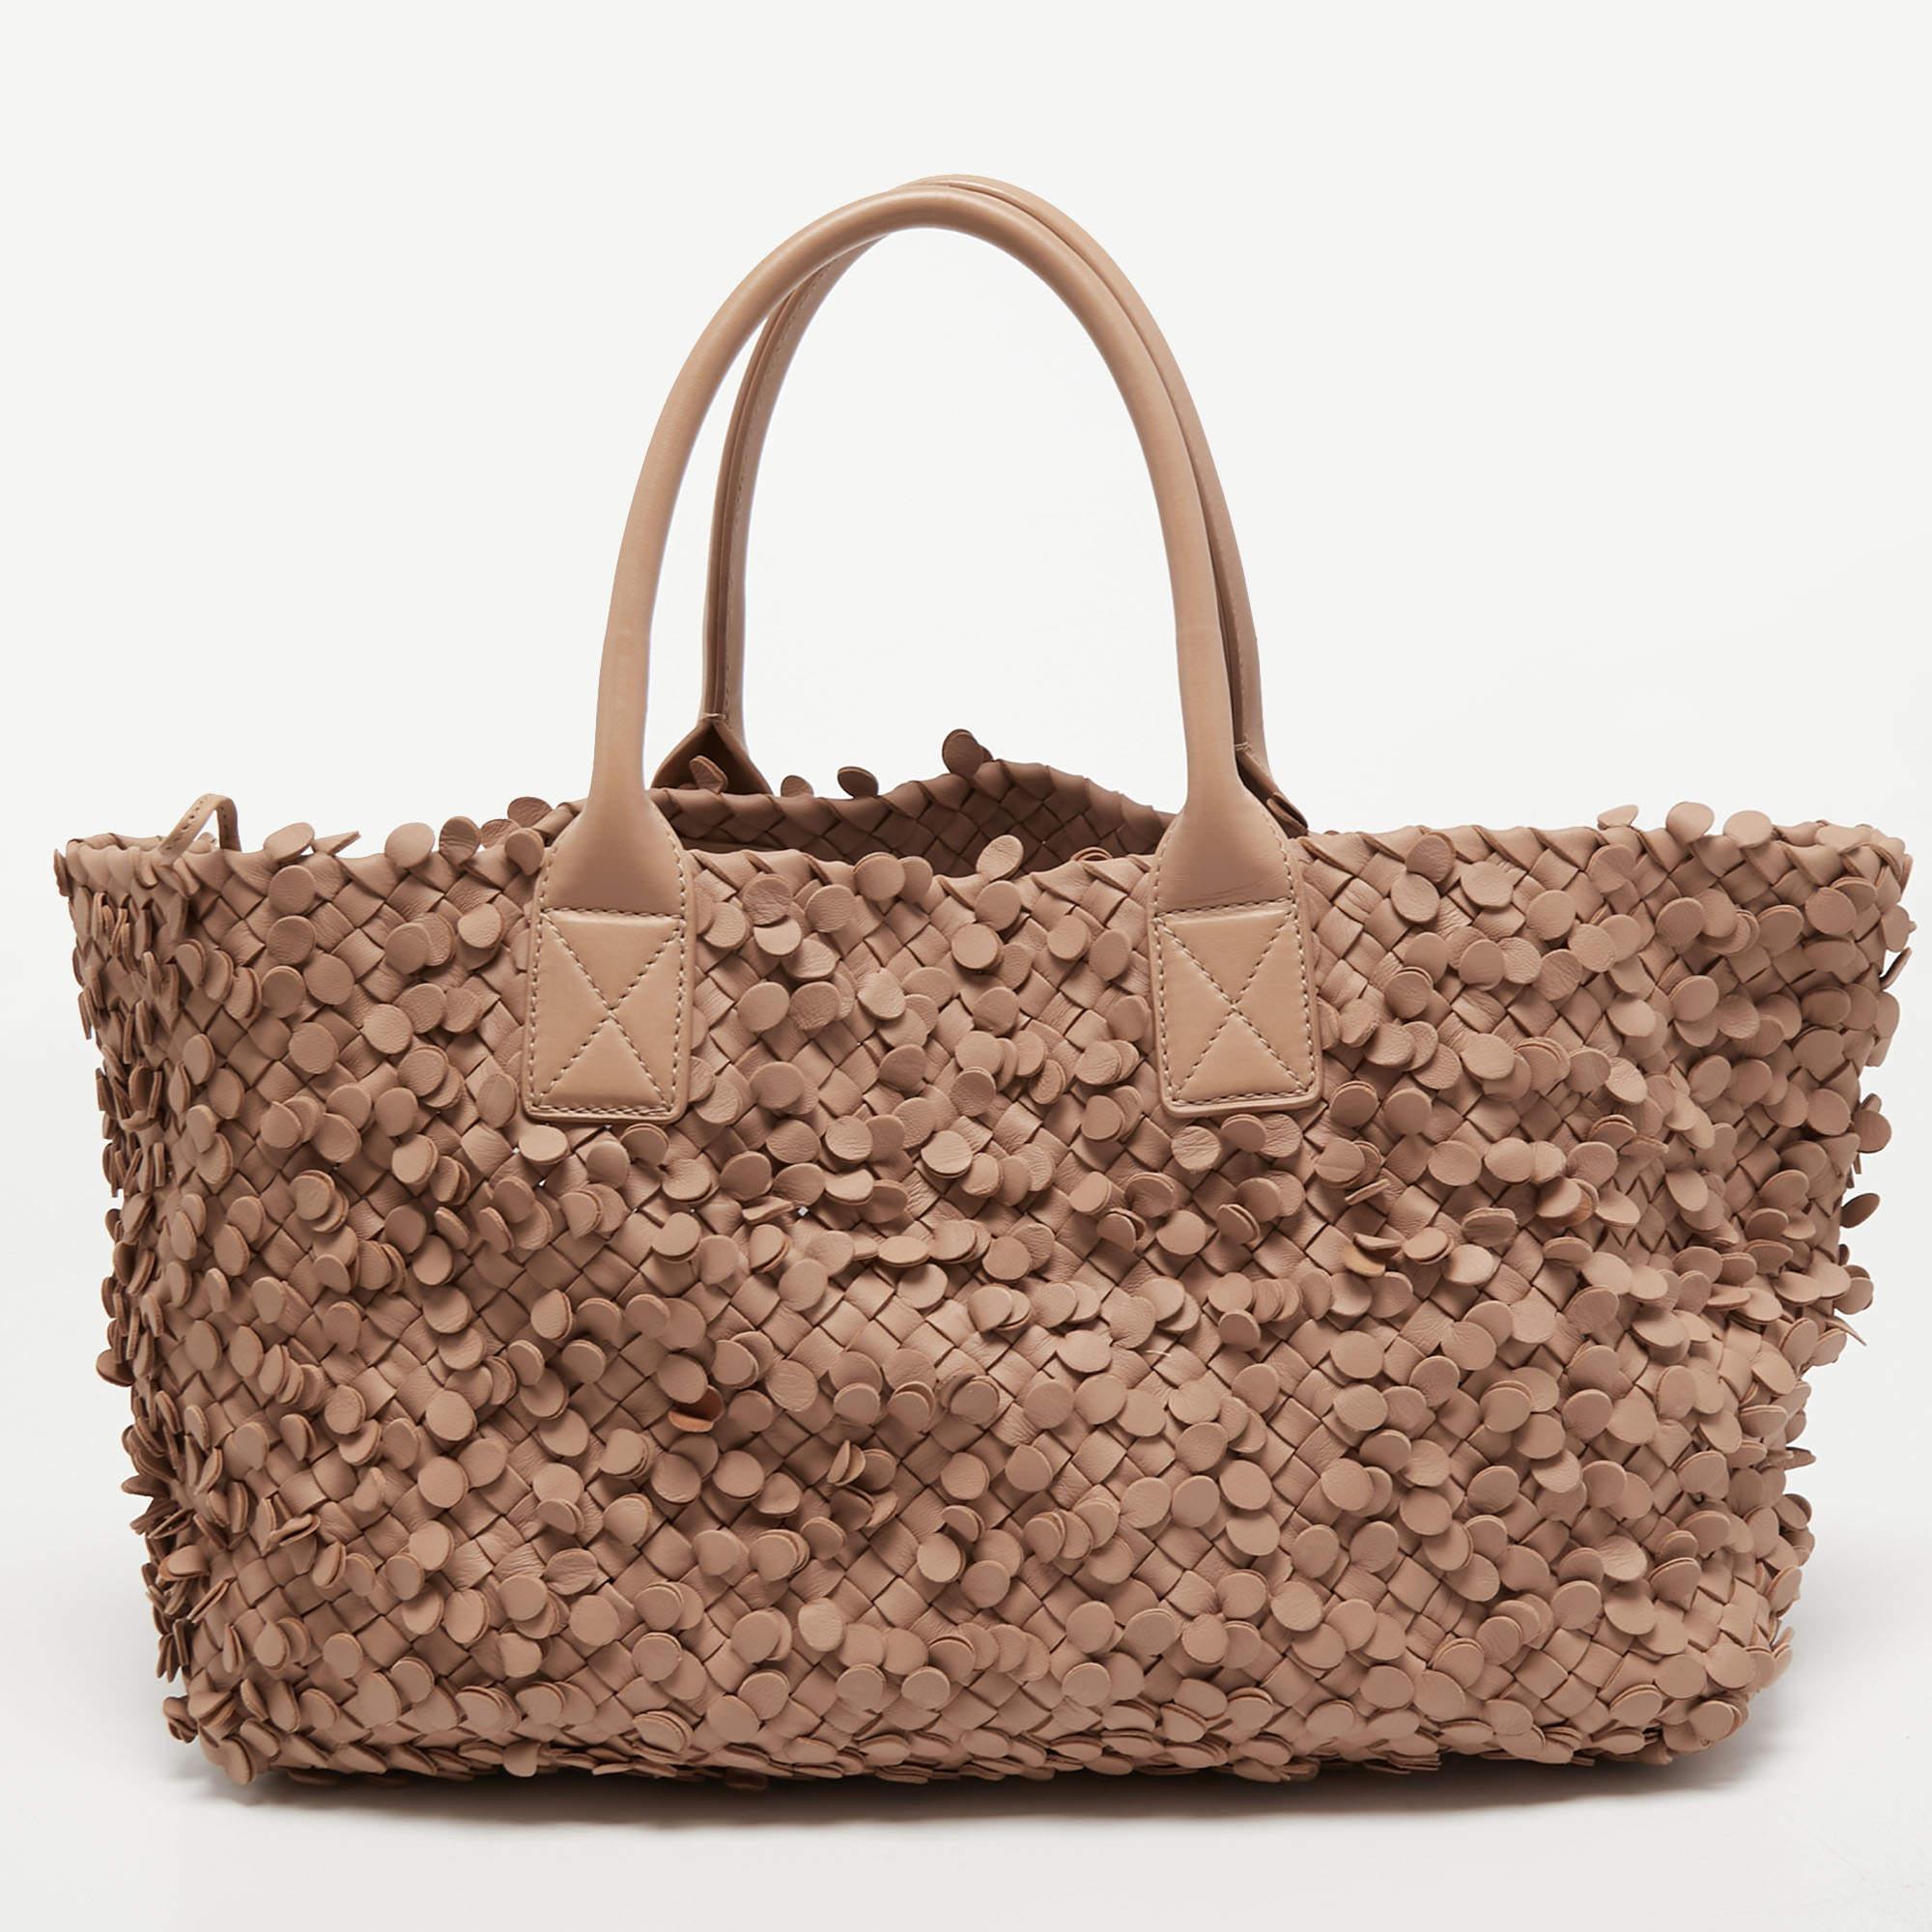 One look at this Cabat tote from Bottega Veneta and you'll know why it is so wonderful. It is high in style and magnificent in appeal. This limited-edition bag is brimming with artistry and quality craftsmanship. The bag is equipped with an interior